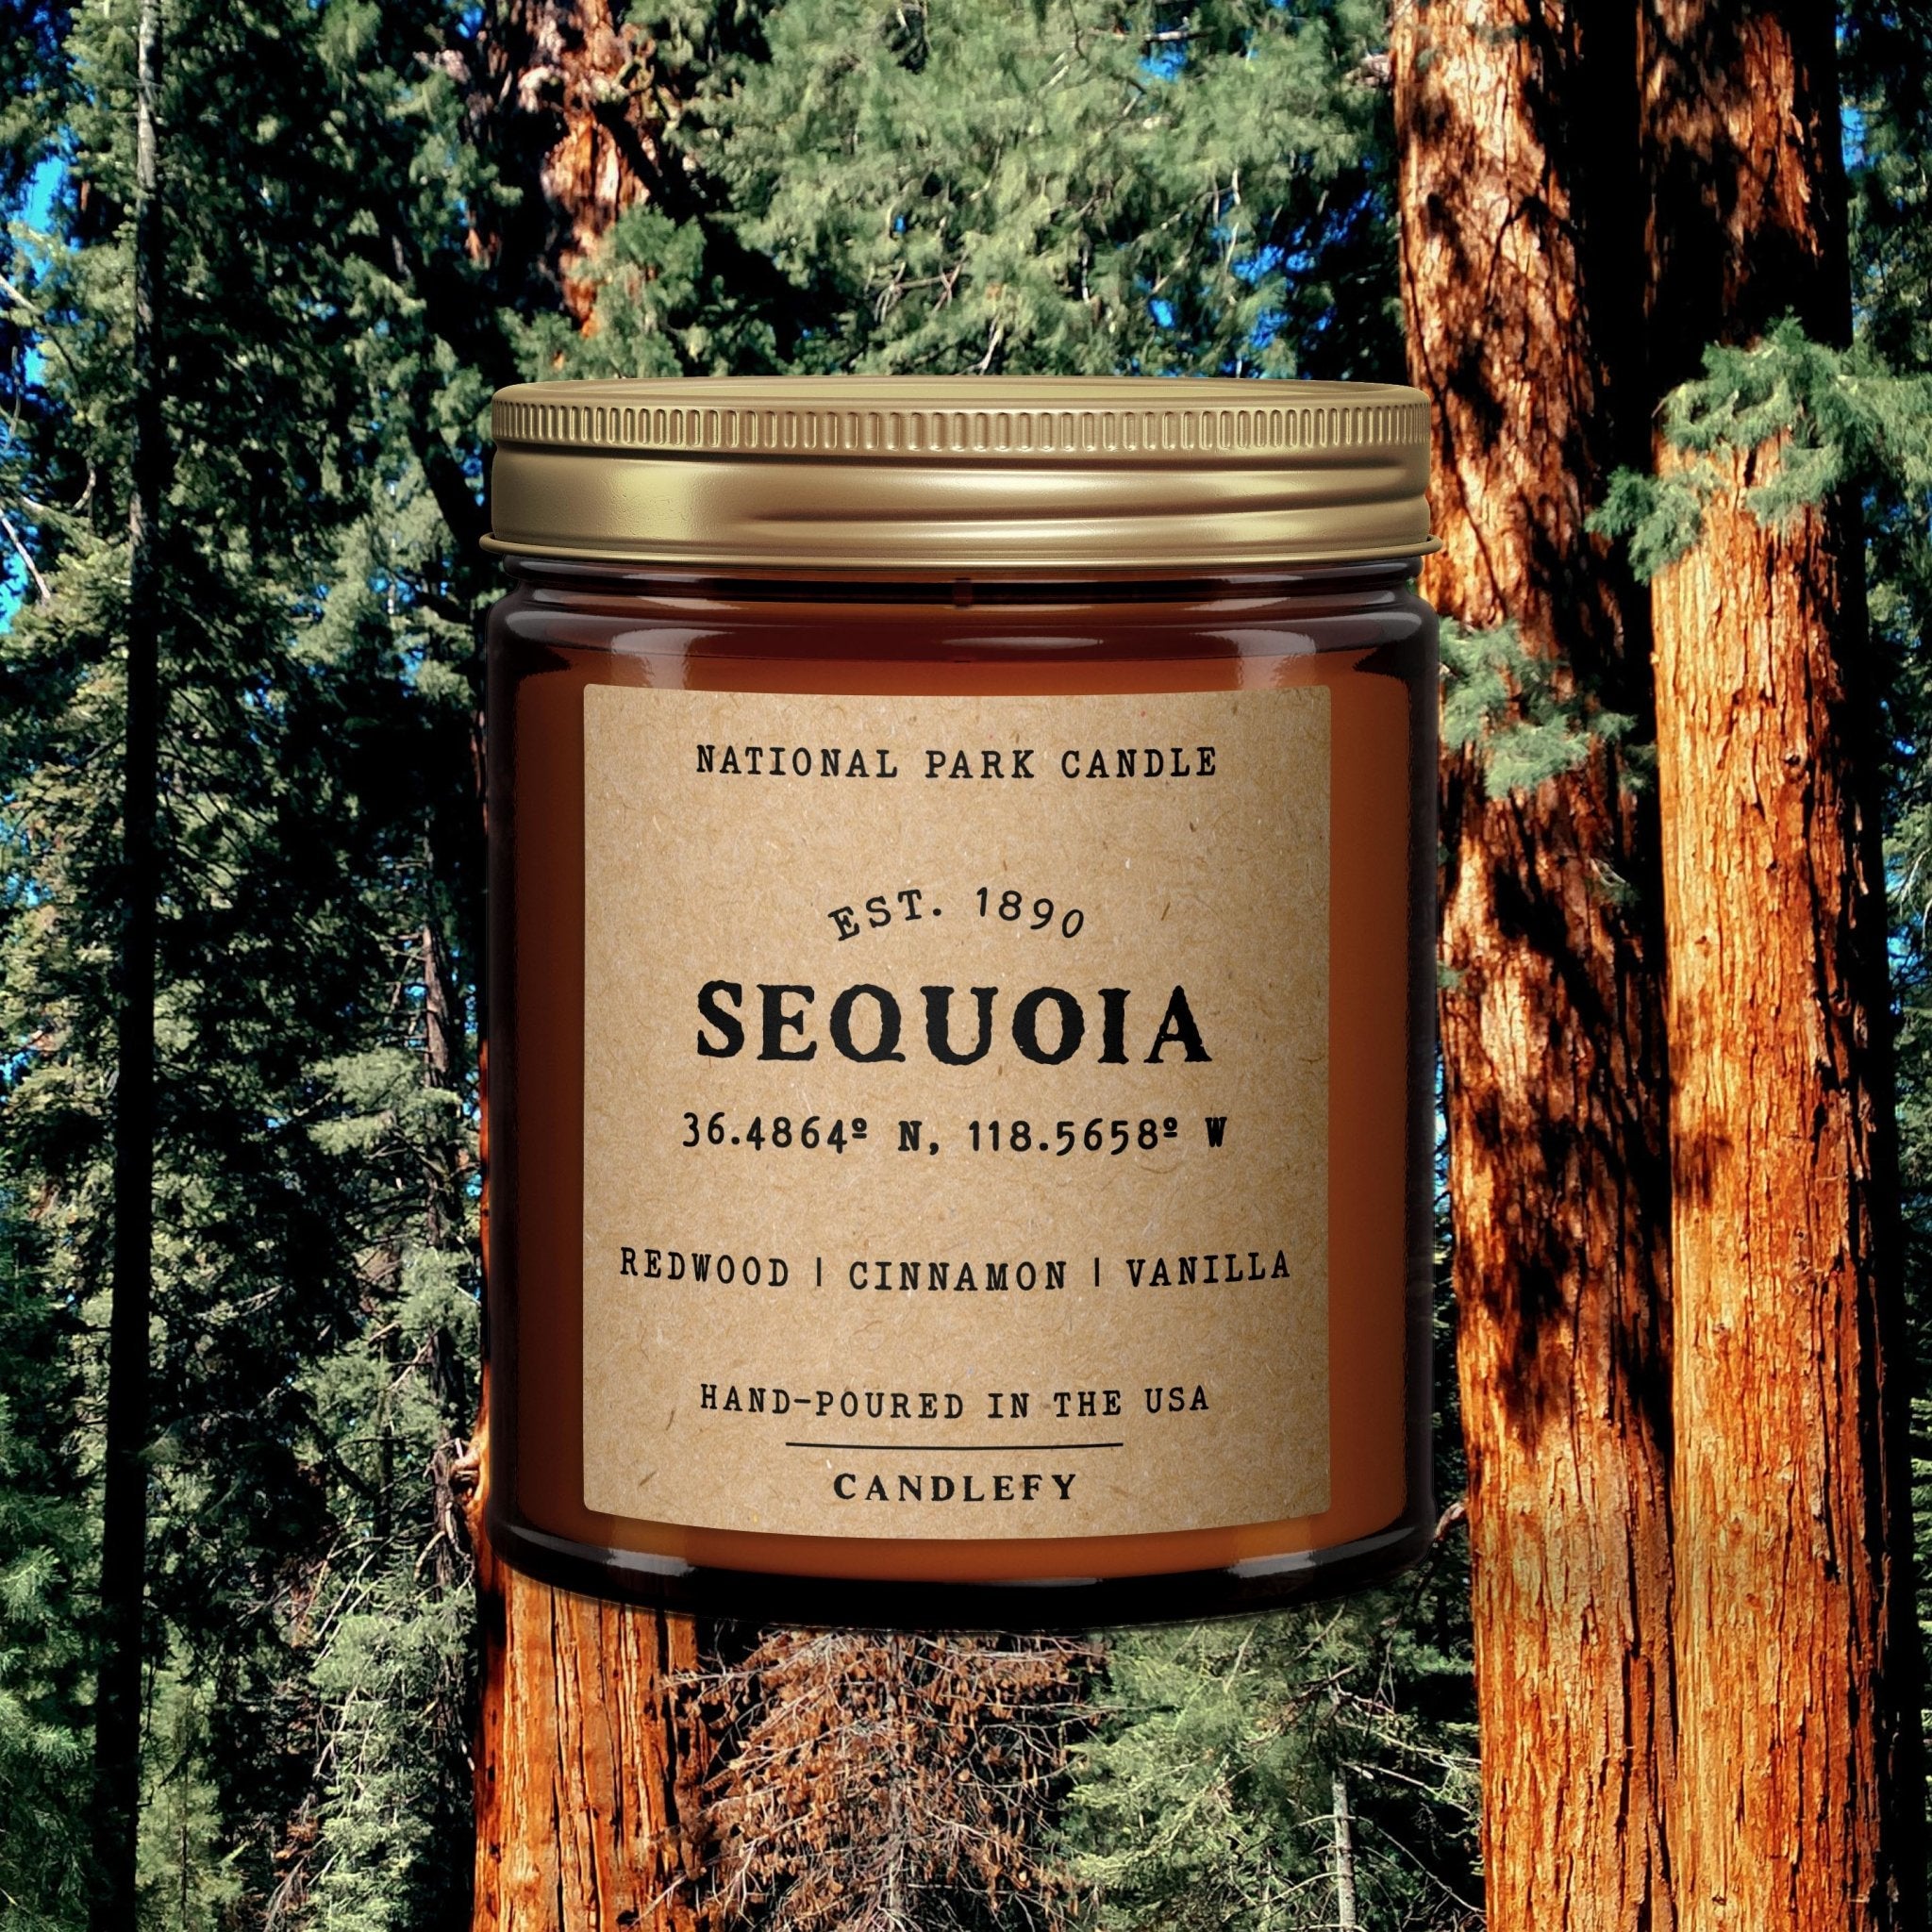 Sequoia National Park Candle - Candlefy